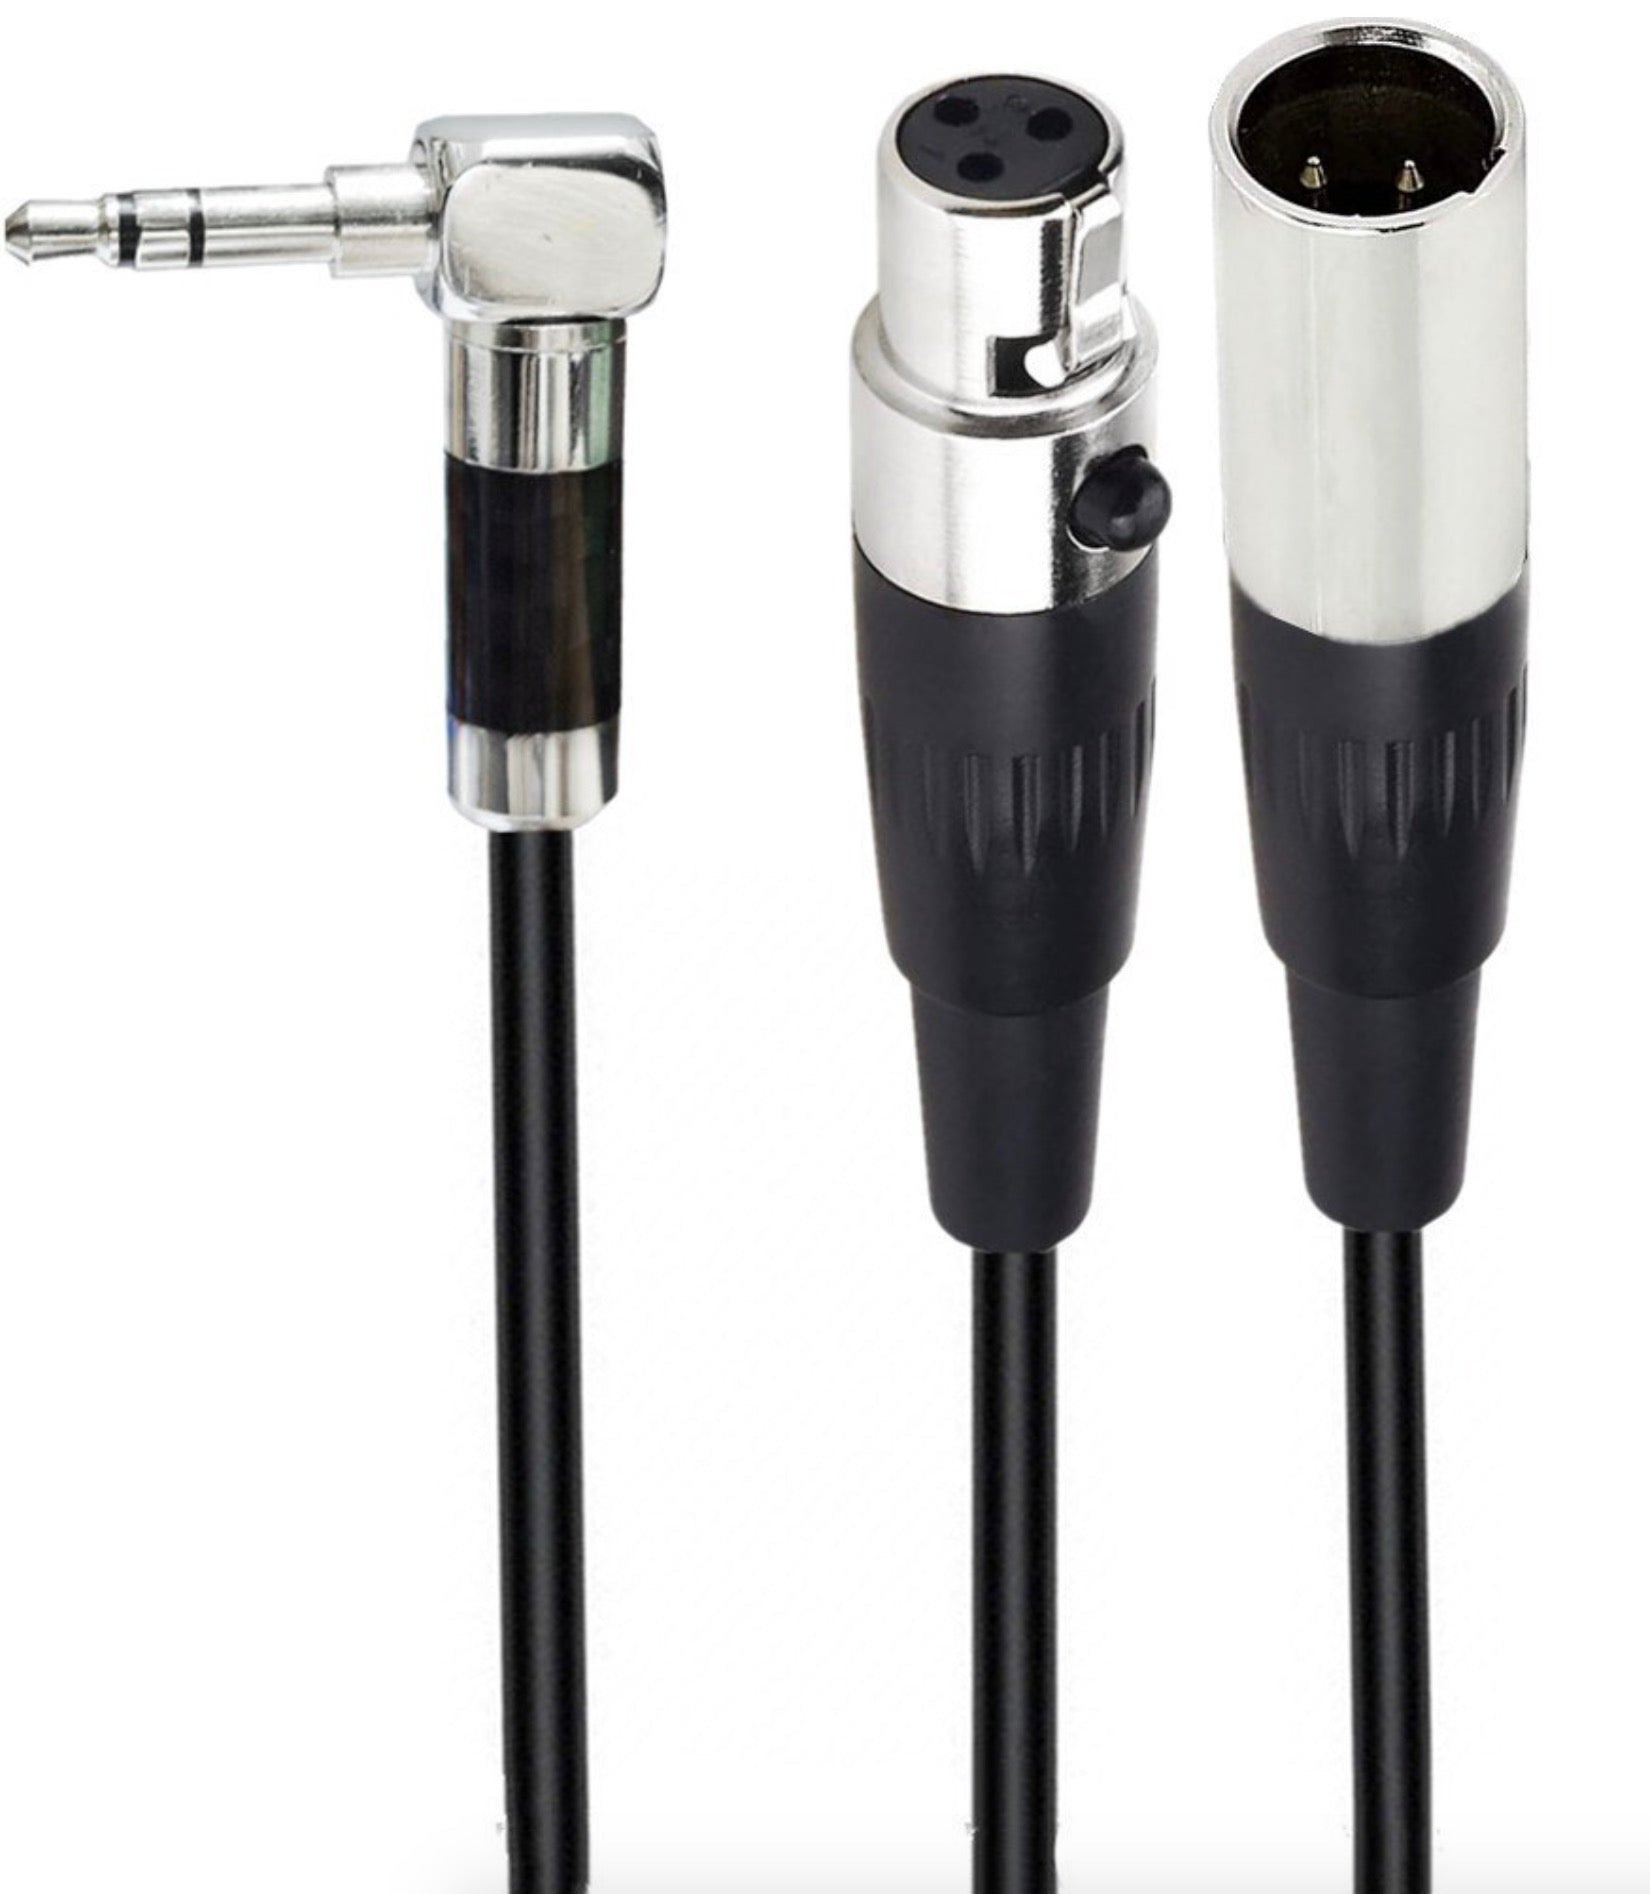 Mini 3-pin XLR Male + Female to 3.5mm 1/8" TRS Male Audio Cable